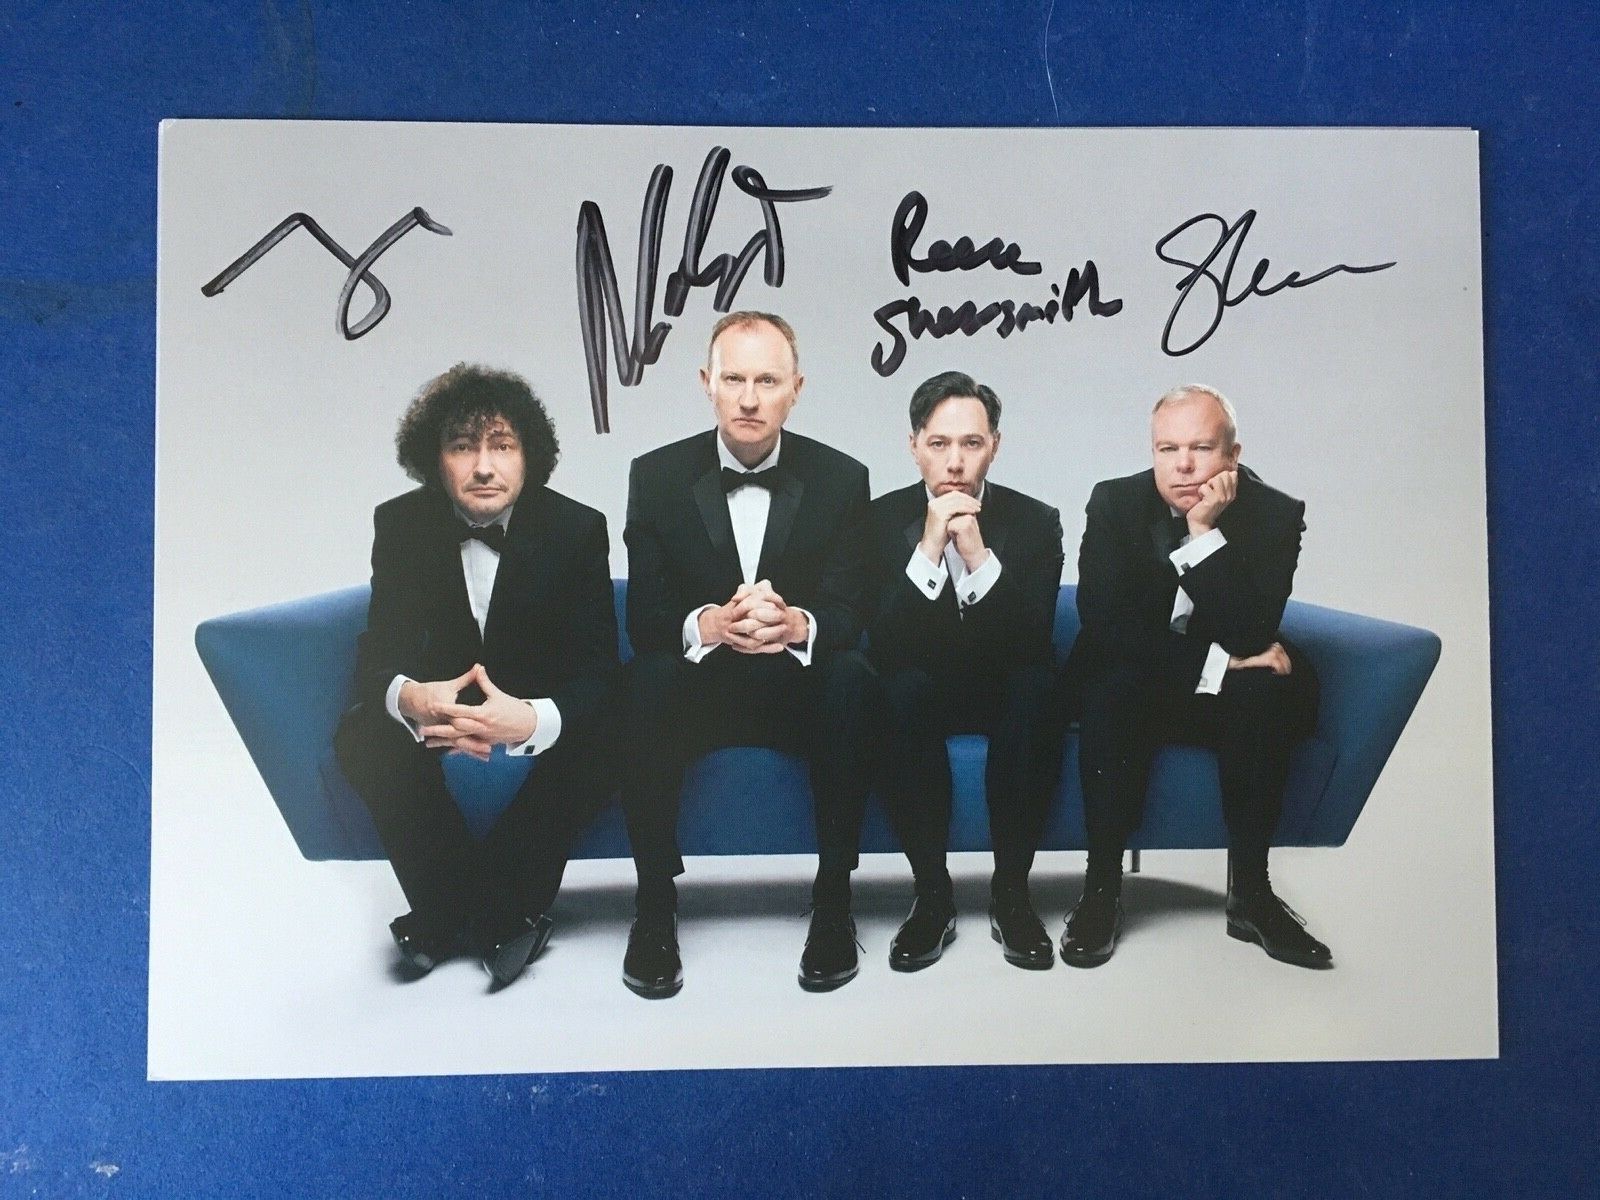 DYSON / GATISS / SHEARSMITH / PEMBERTON - FULLY SIGNED LEAGUE OF GENTLEMEN Photo Poster painting